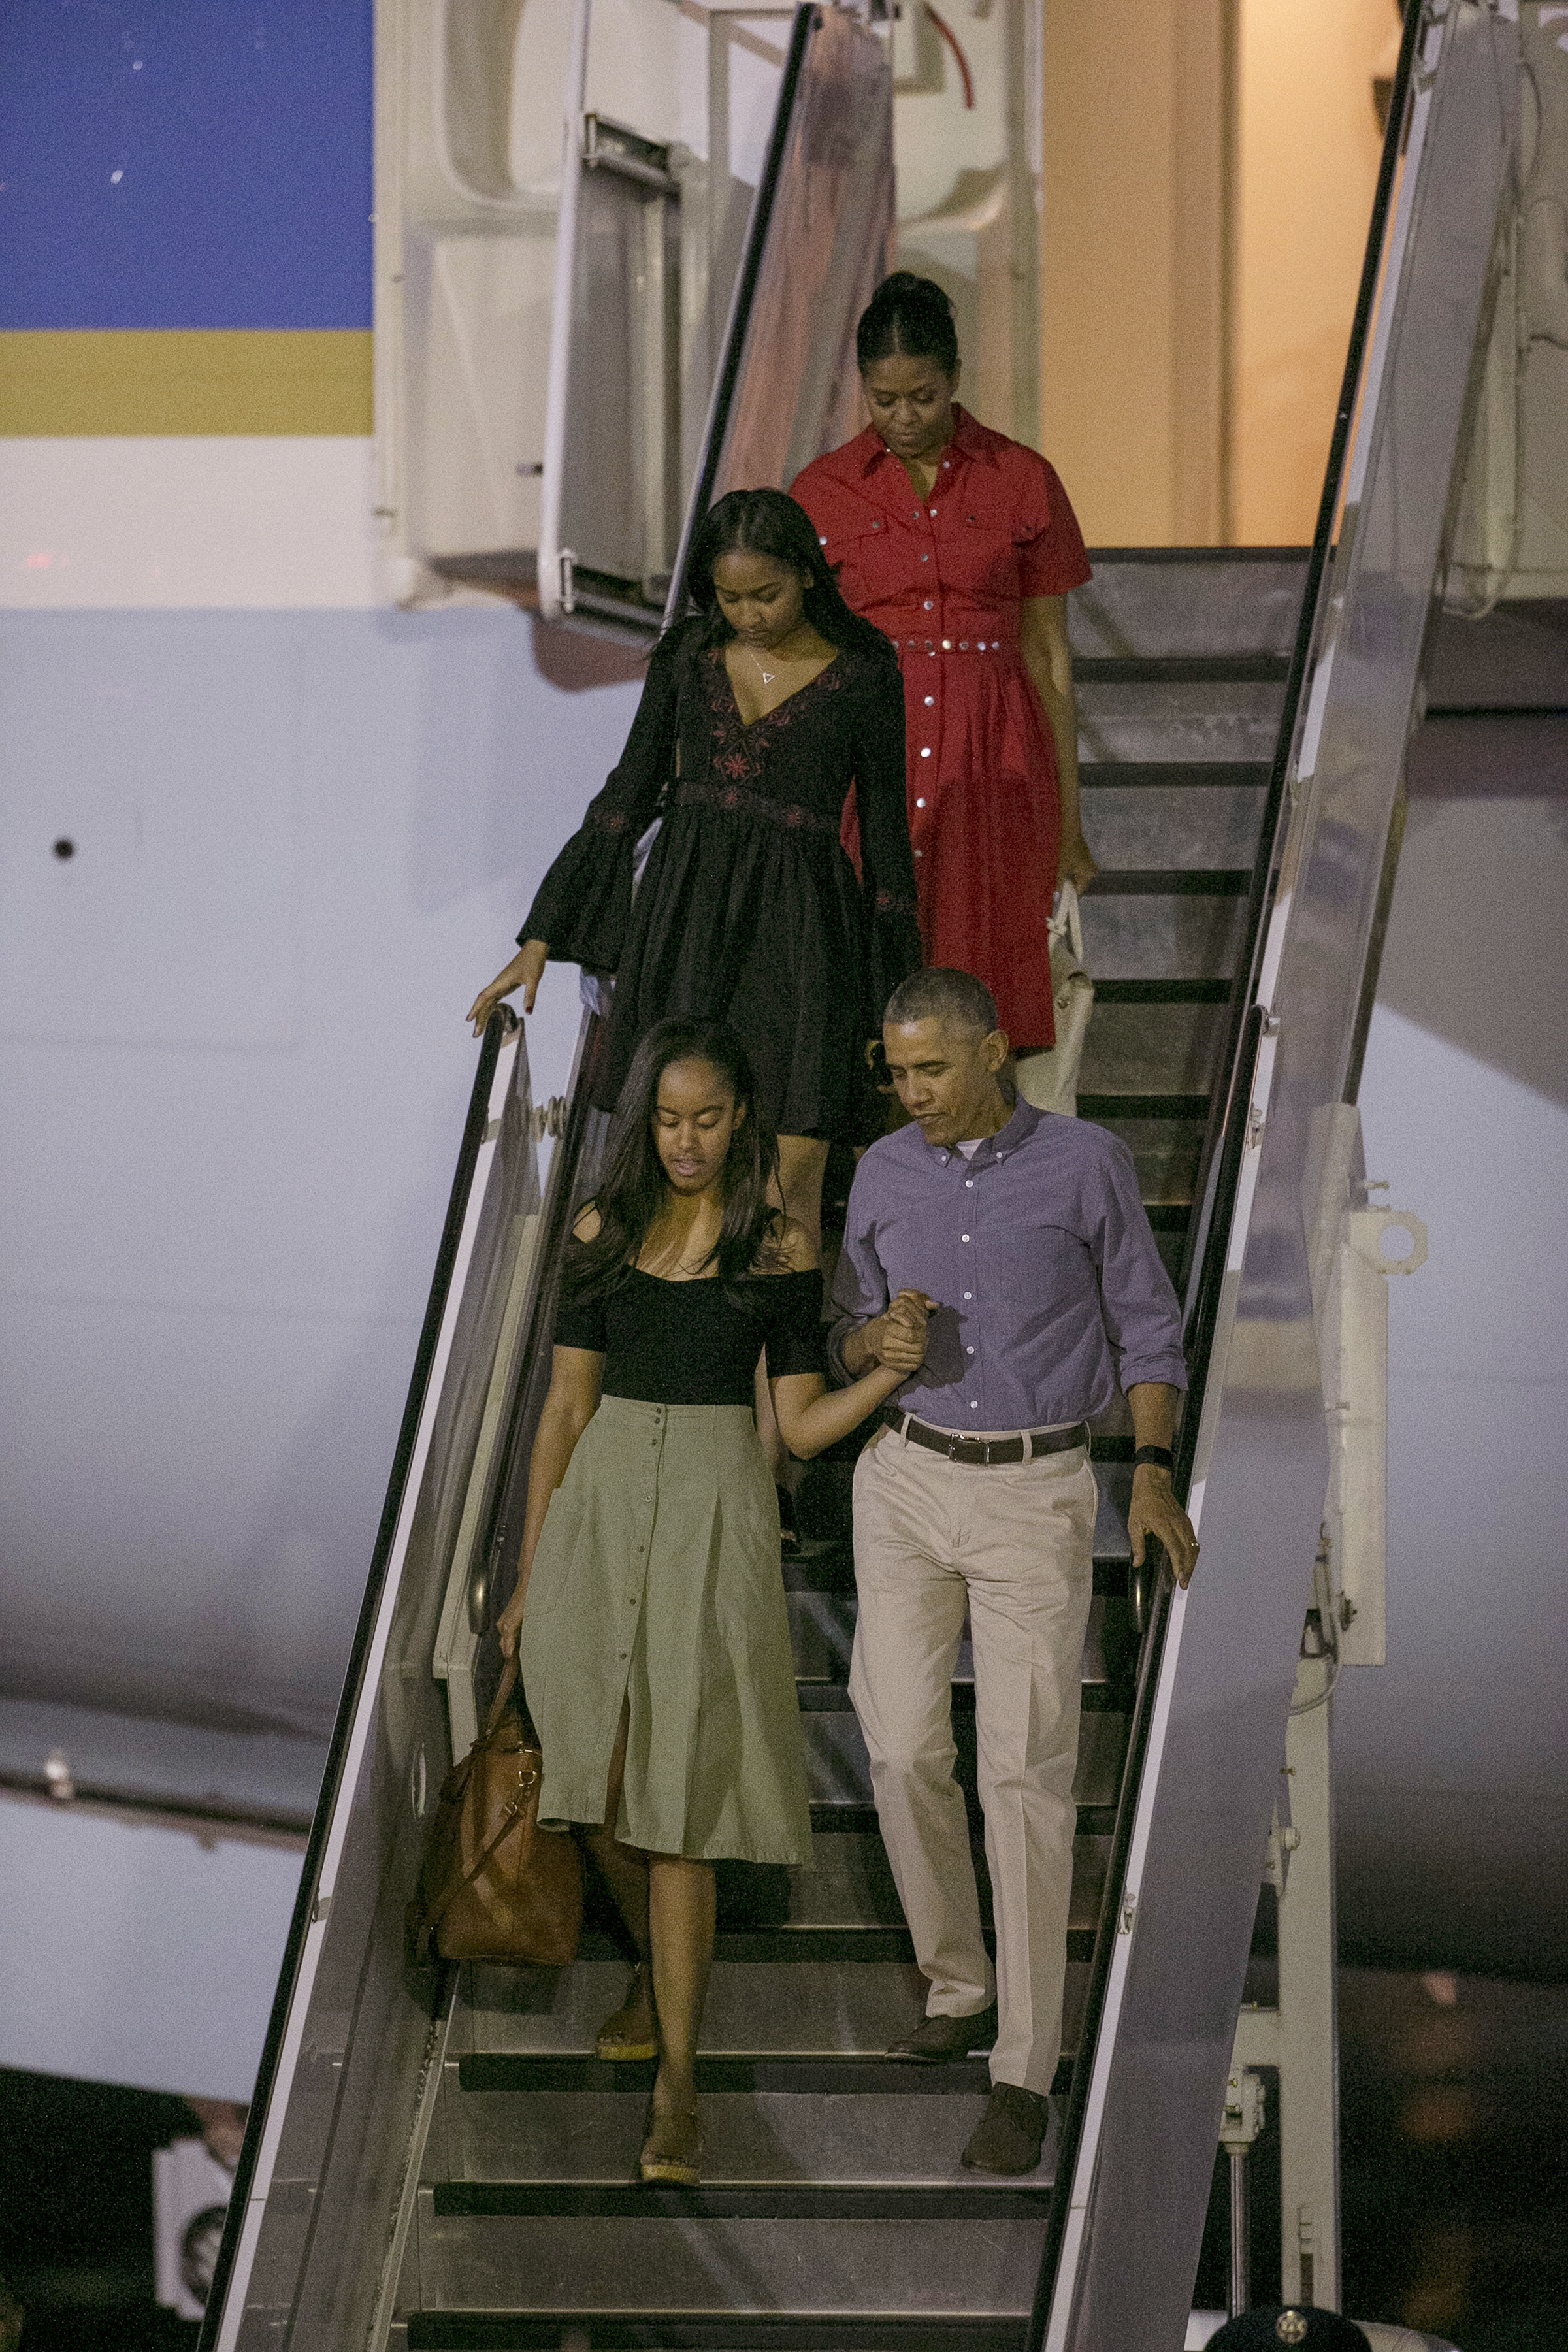 U.S. President Barack Obama, first lady Michelle, top, and their daughters, Malia Obama, bottom, and Sasha, exit Air Force One upon their arrival at Joint Base Pearl Harbor-Hickam, Friday, Dec. 16, 2016, in Honolulu, Hawaii, for their annual family vacation on the island of Oahu. (AP Photo/Marco Garcia)